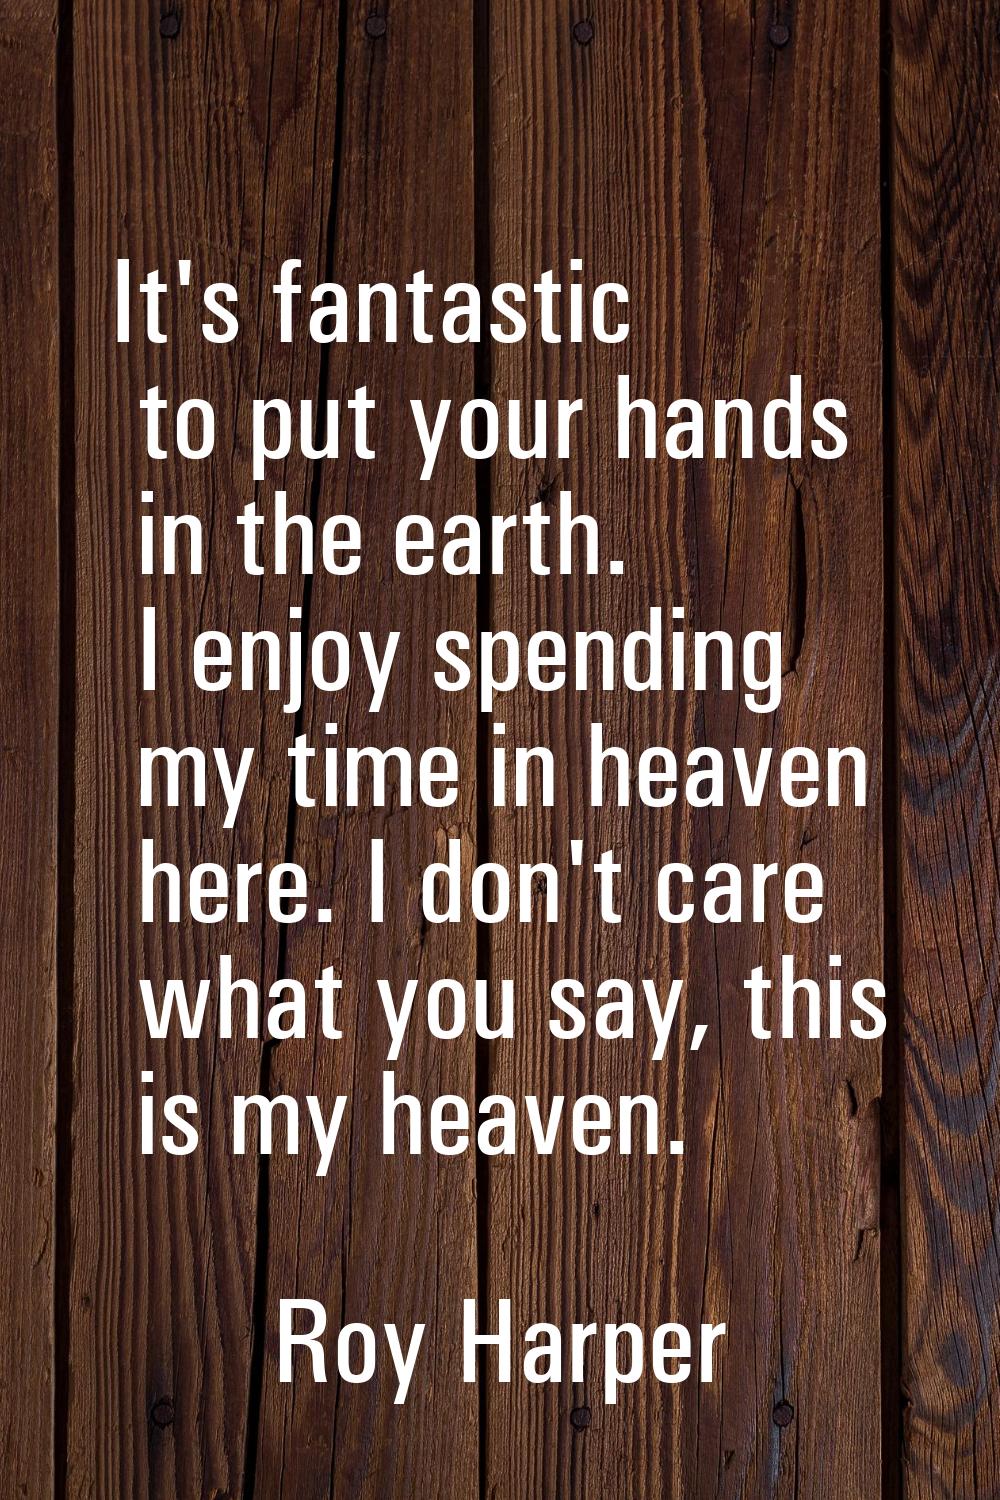 It's fantastic to put your hands in the earth. I enjoy spending my time in heaven here. I don't car